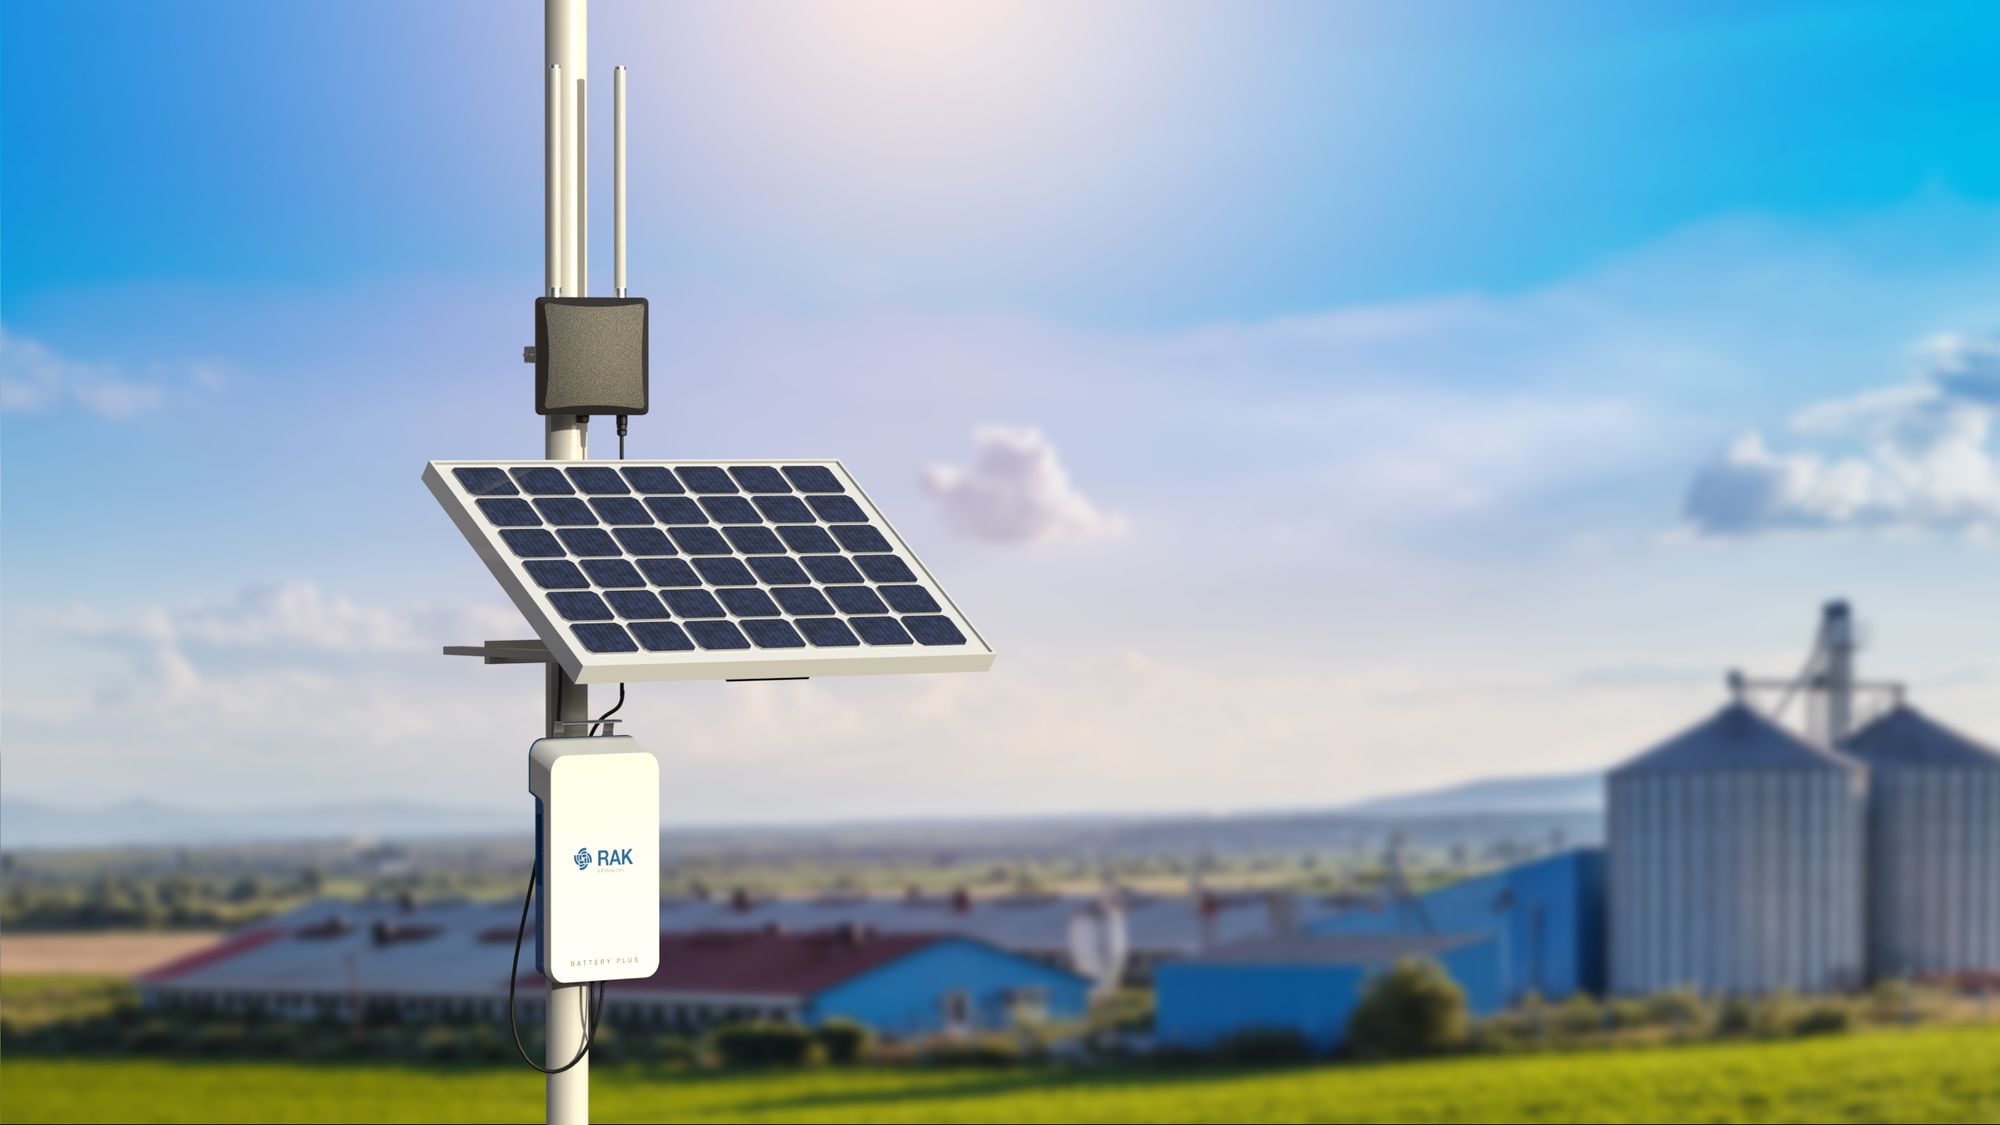 How to Build a Sustainable, Solar-Powered LoRaWAN Network